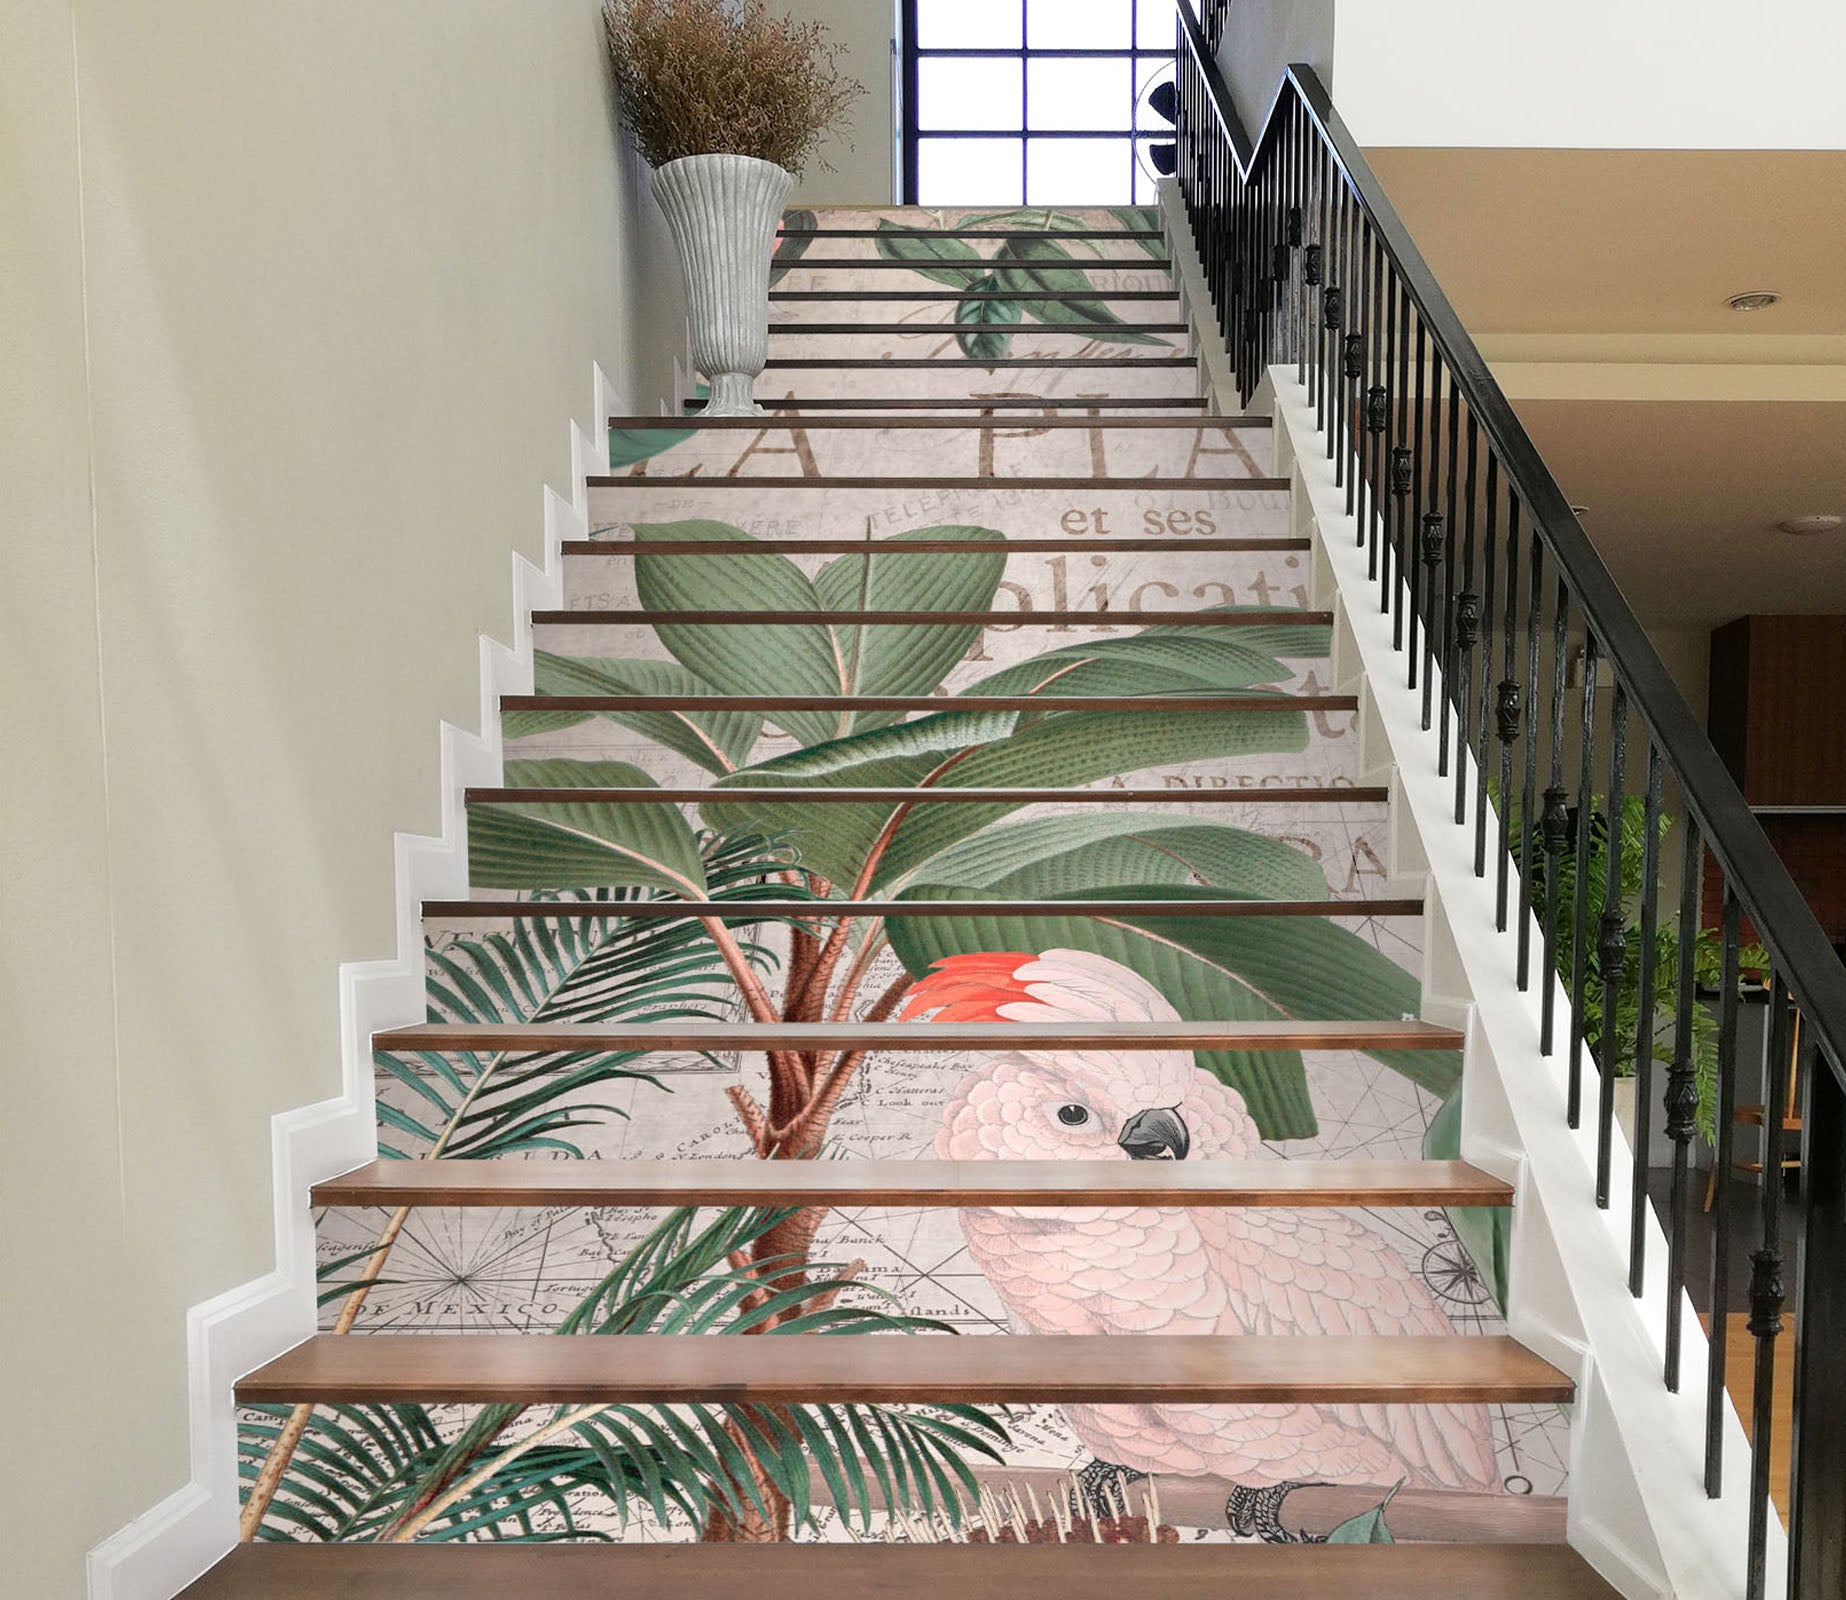 3D Leaves White Parrot 11039 Andrea Haase Stair Risers